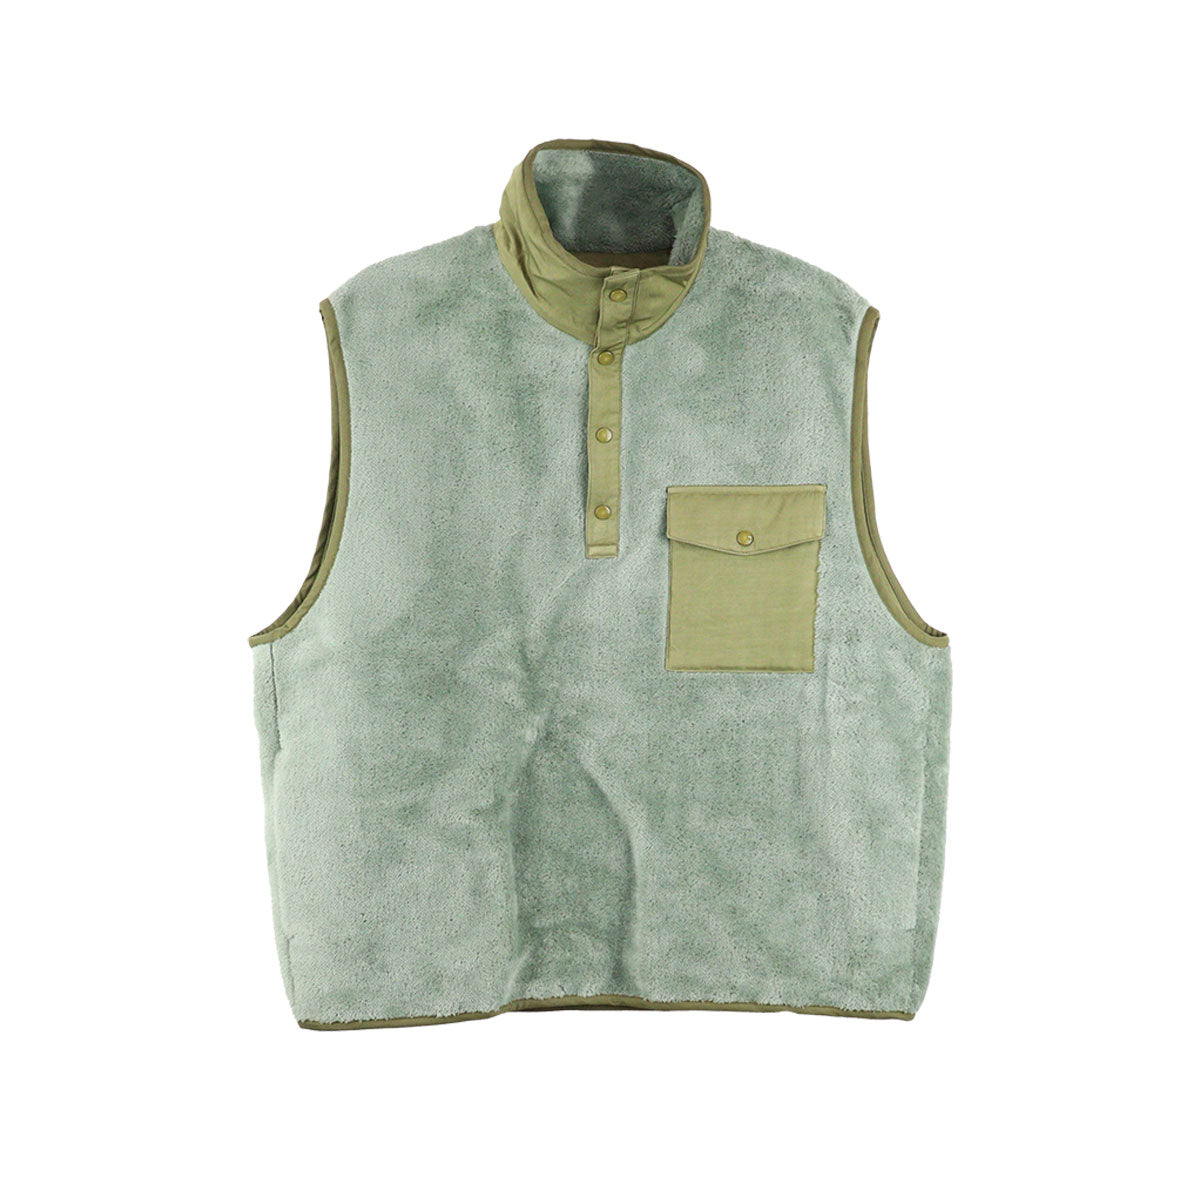 BARLOW P.O. VEST | Why are you here?